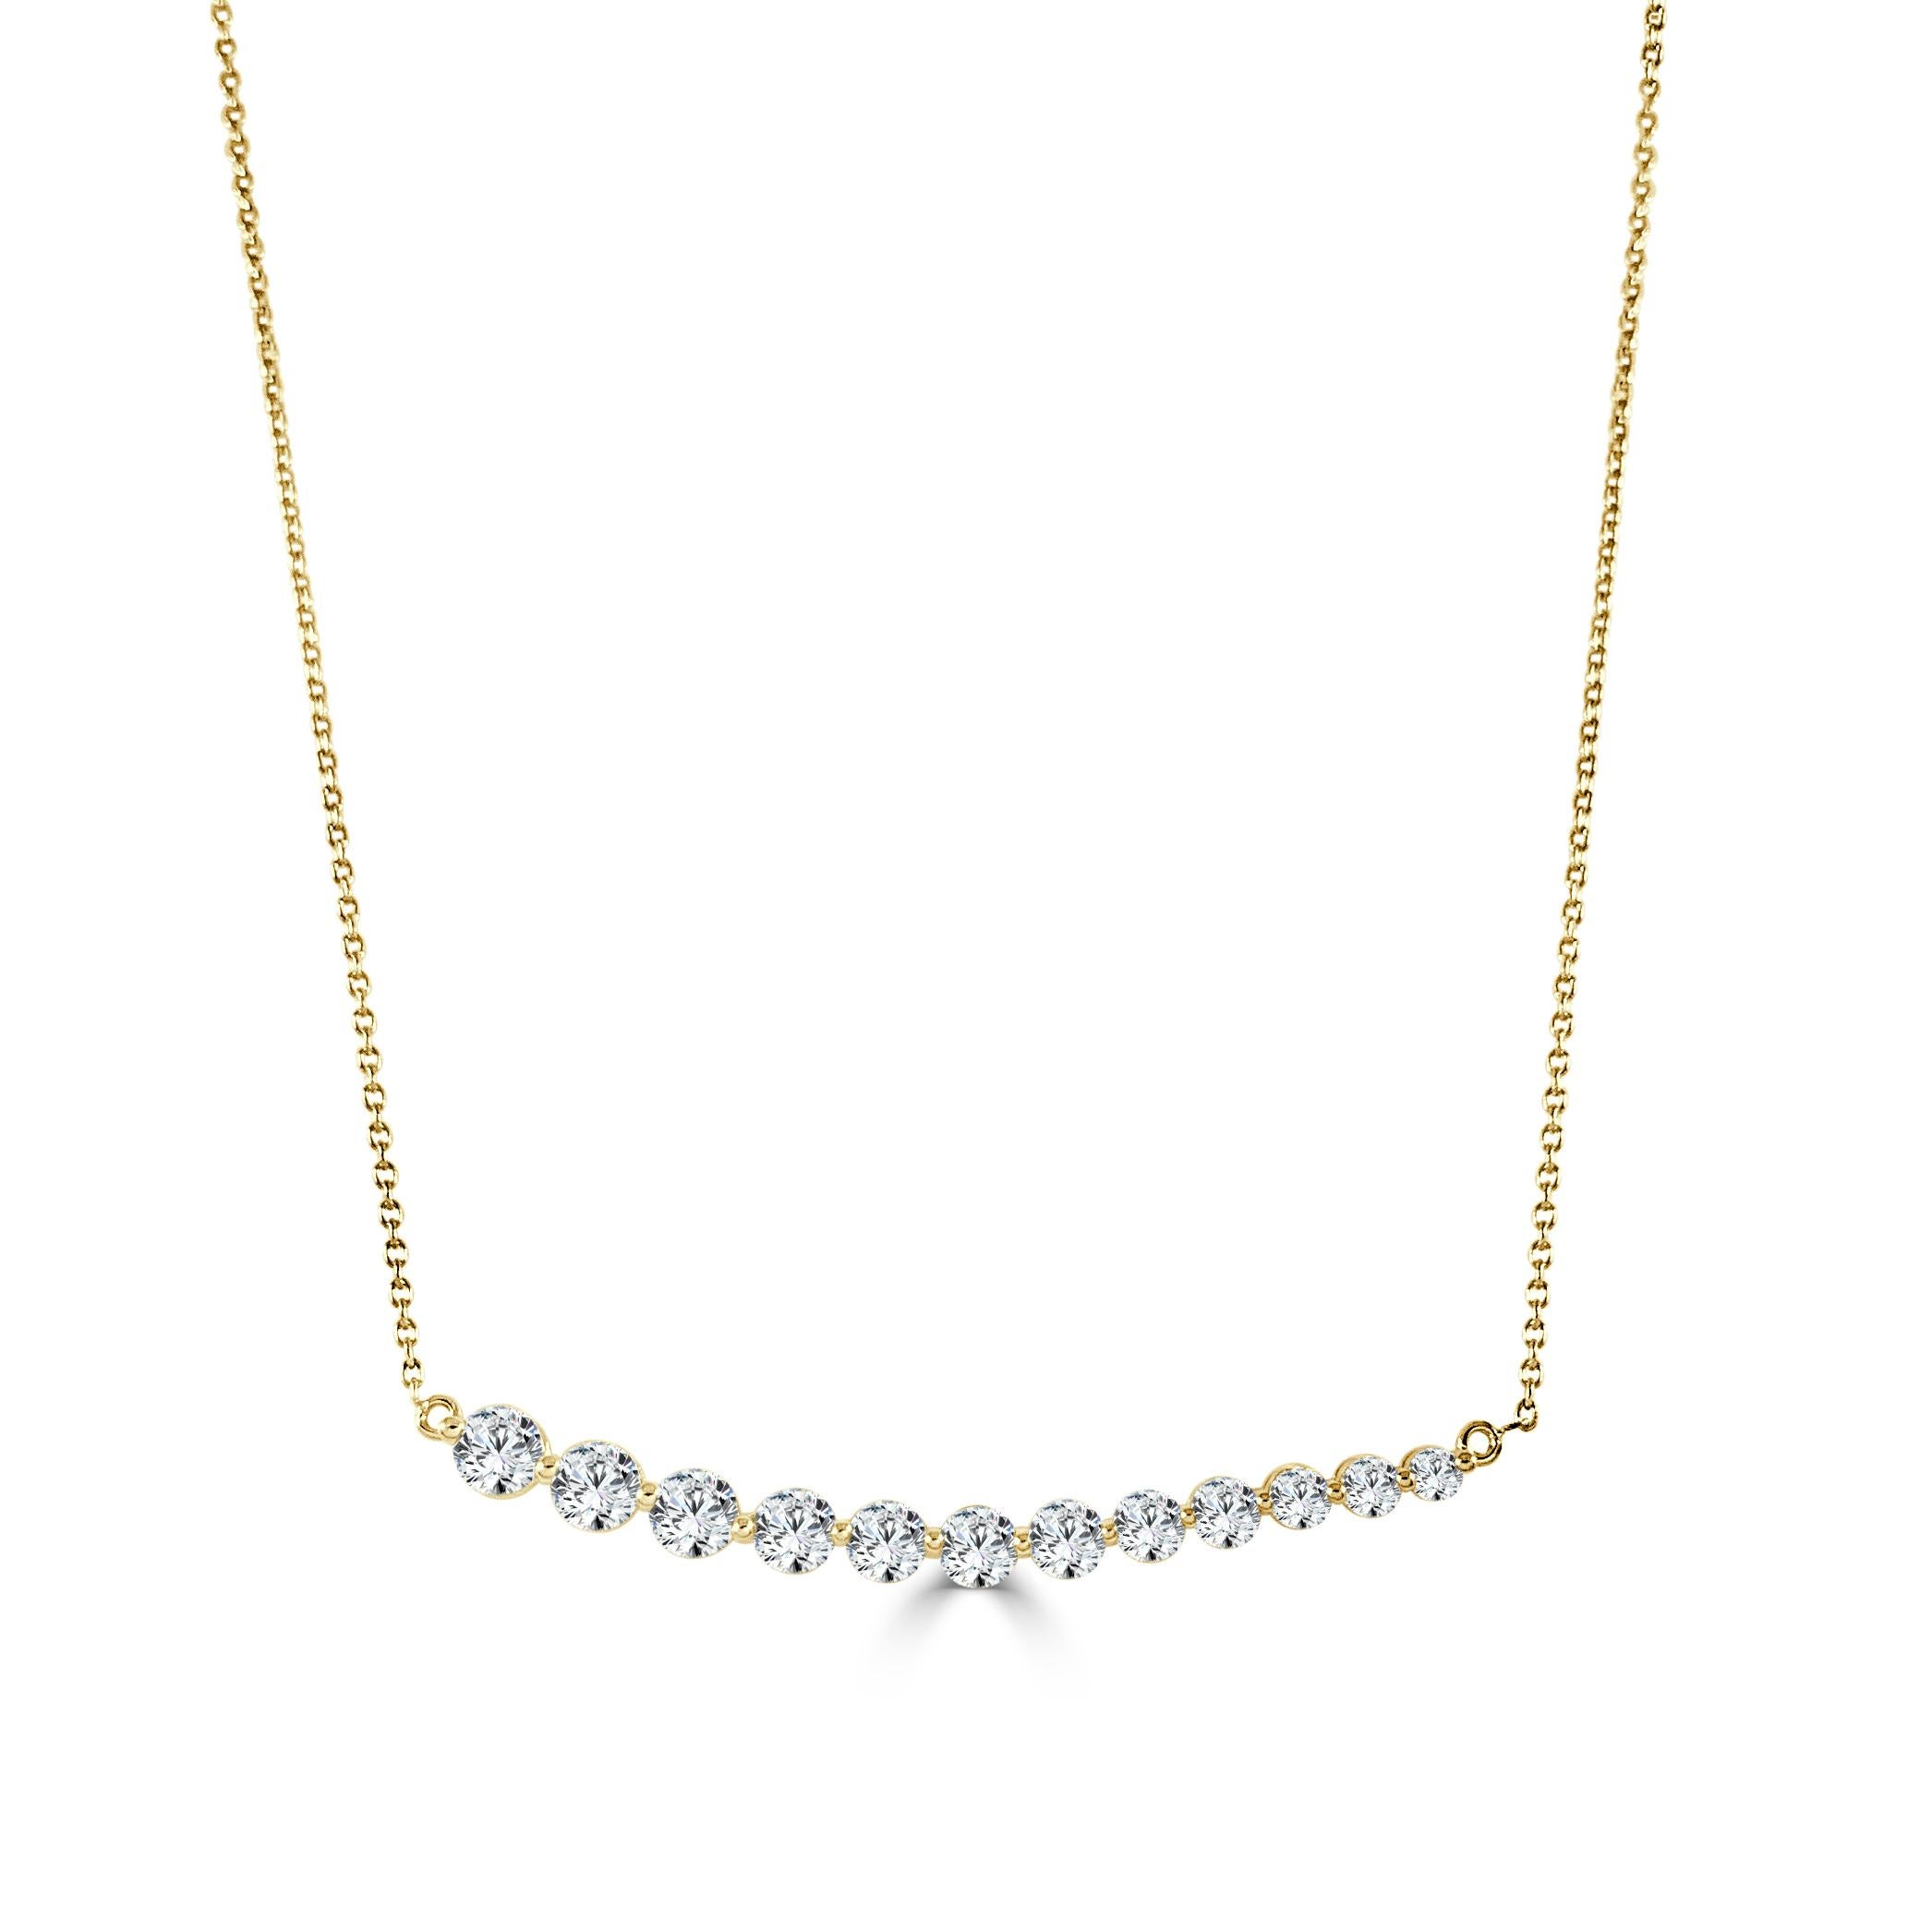 Add this Classic and Beautiful Diamond Bar Necklace to your look! Crafted of 14K Gold this neckalce features 12 Natural Round White Diamonds weighing 1.06 carats. Chain length is 18